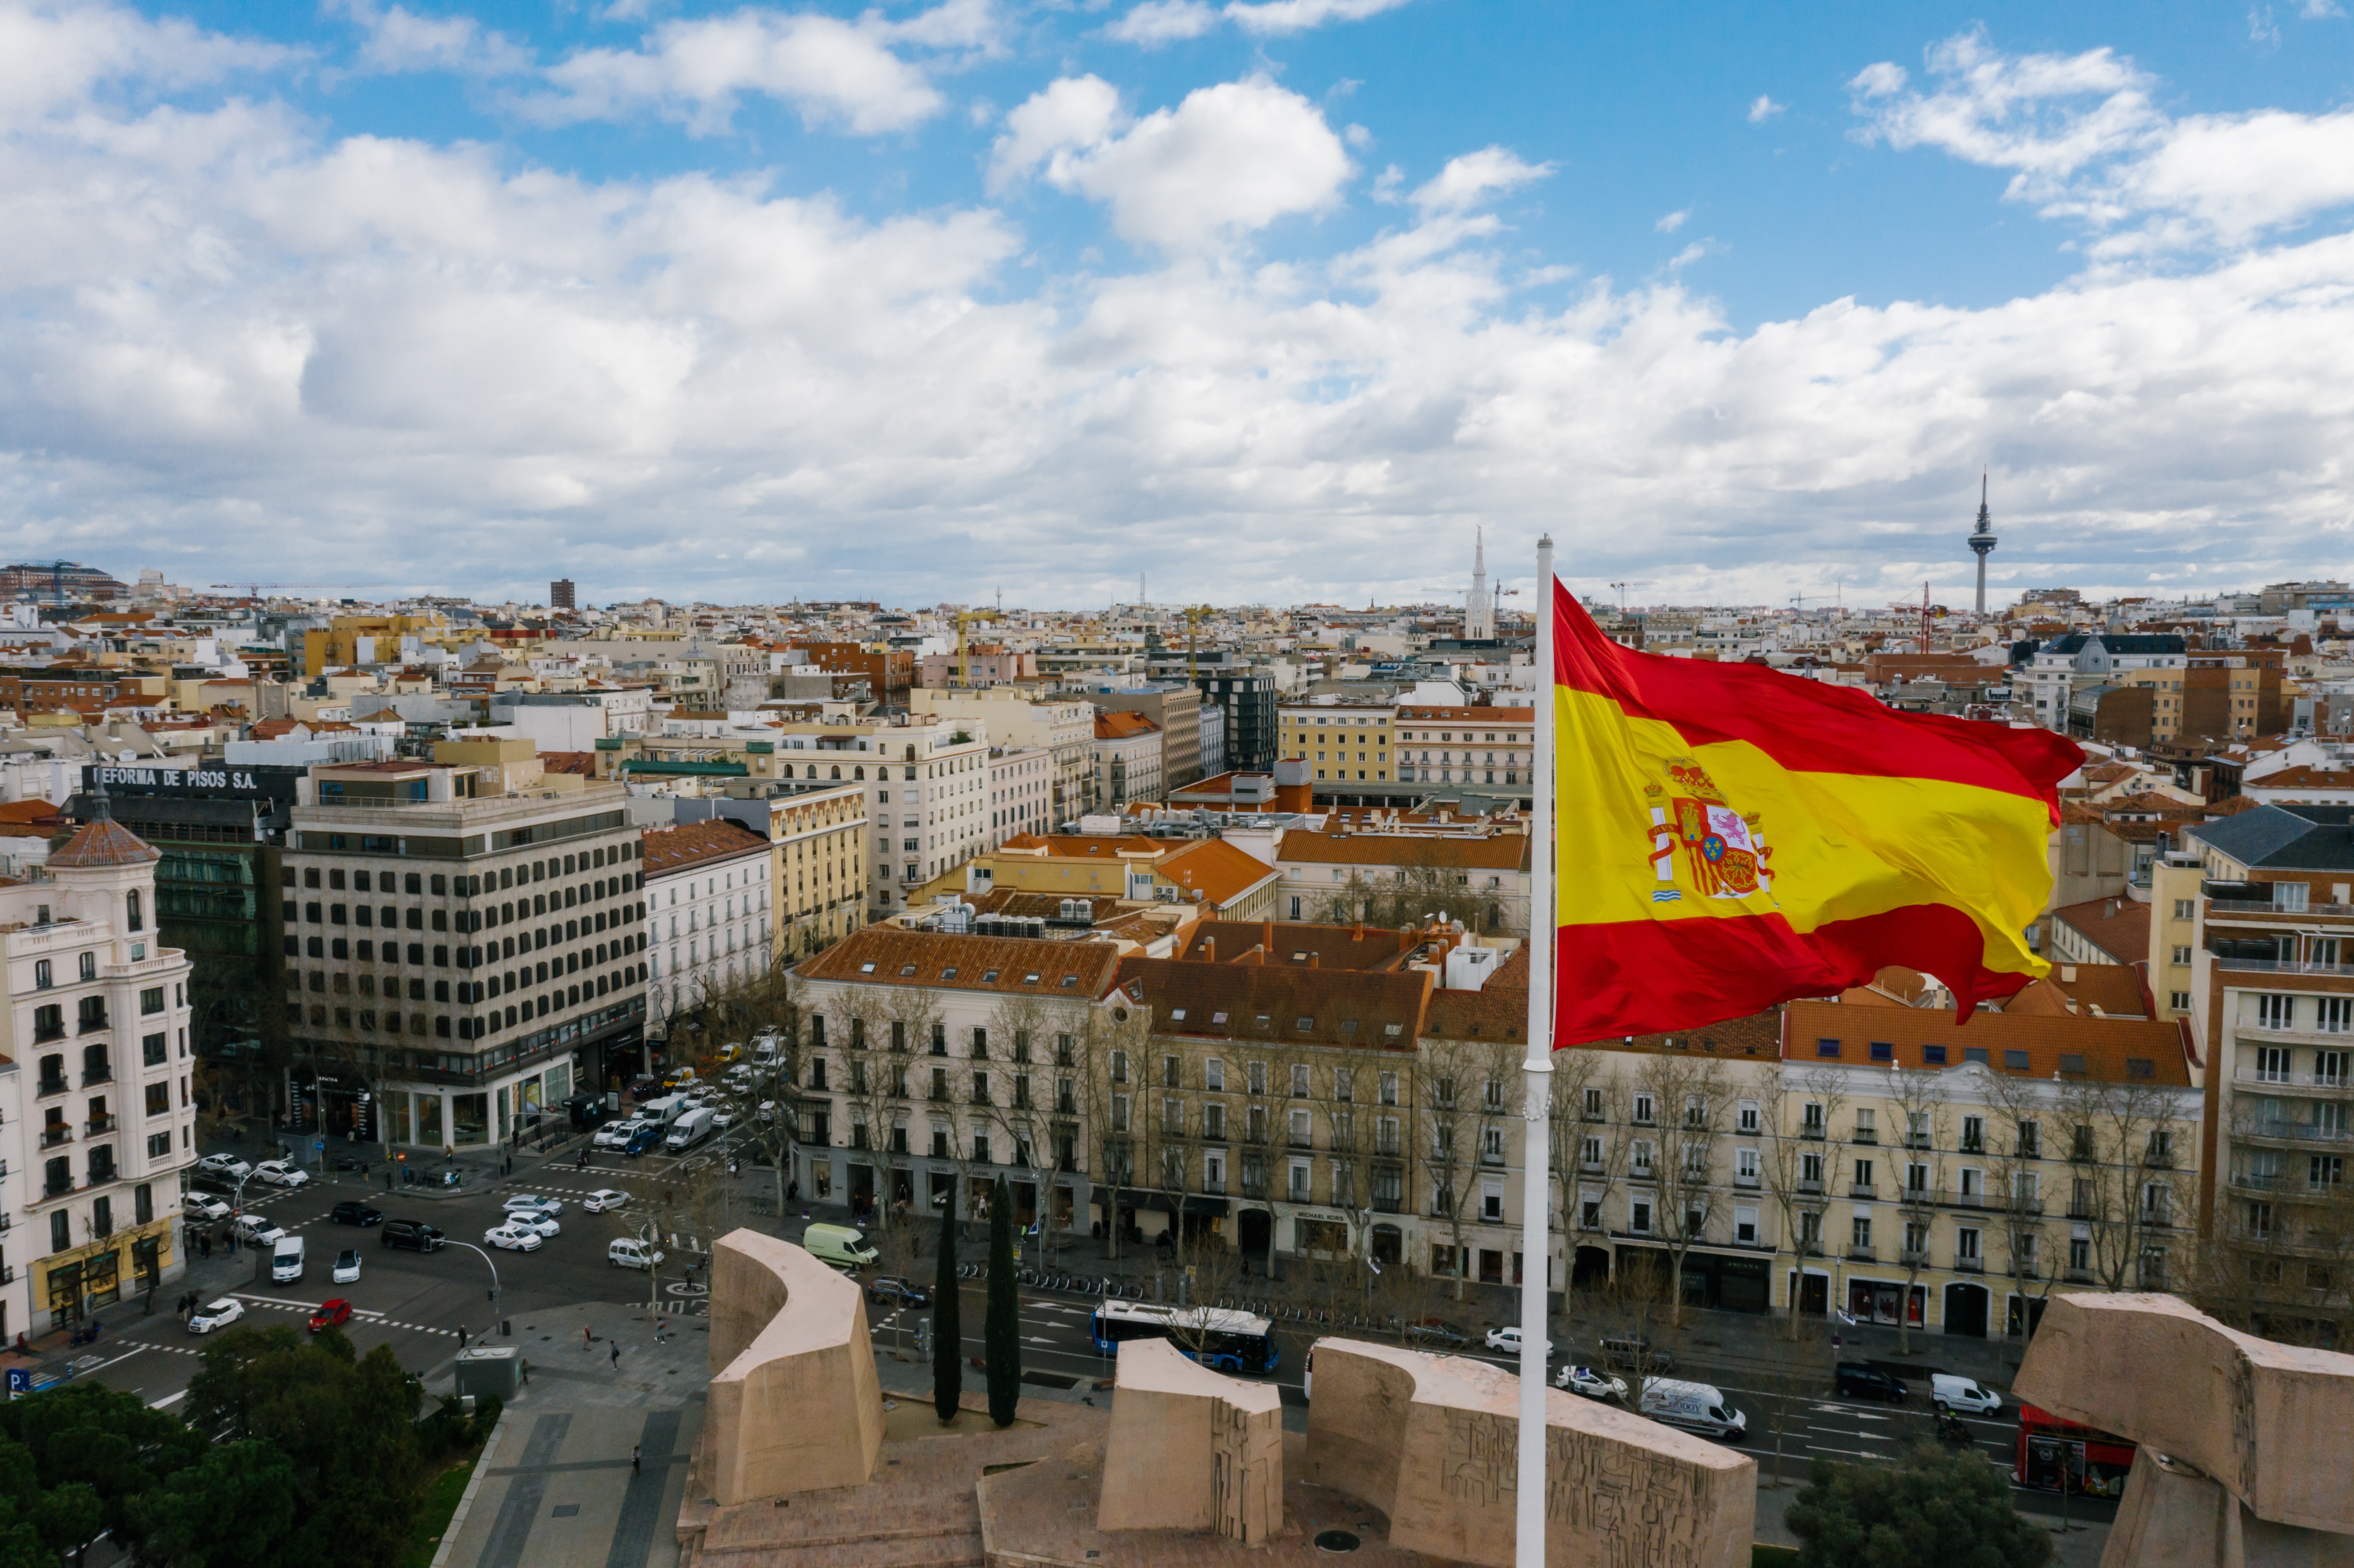 The Spanish national flag flying from a tall building over a cityscape.